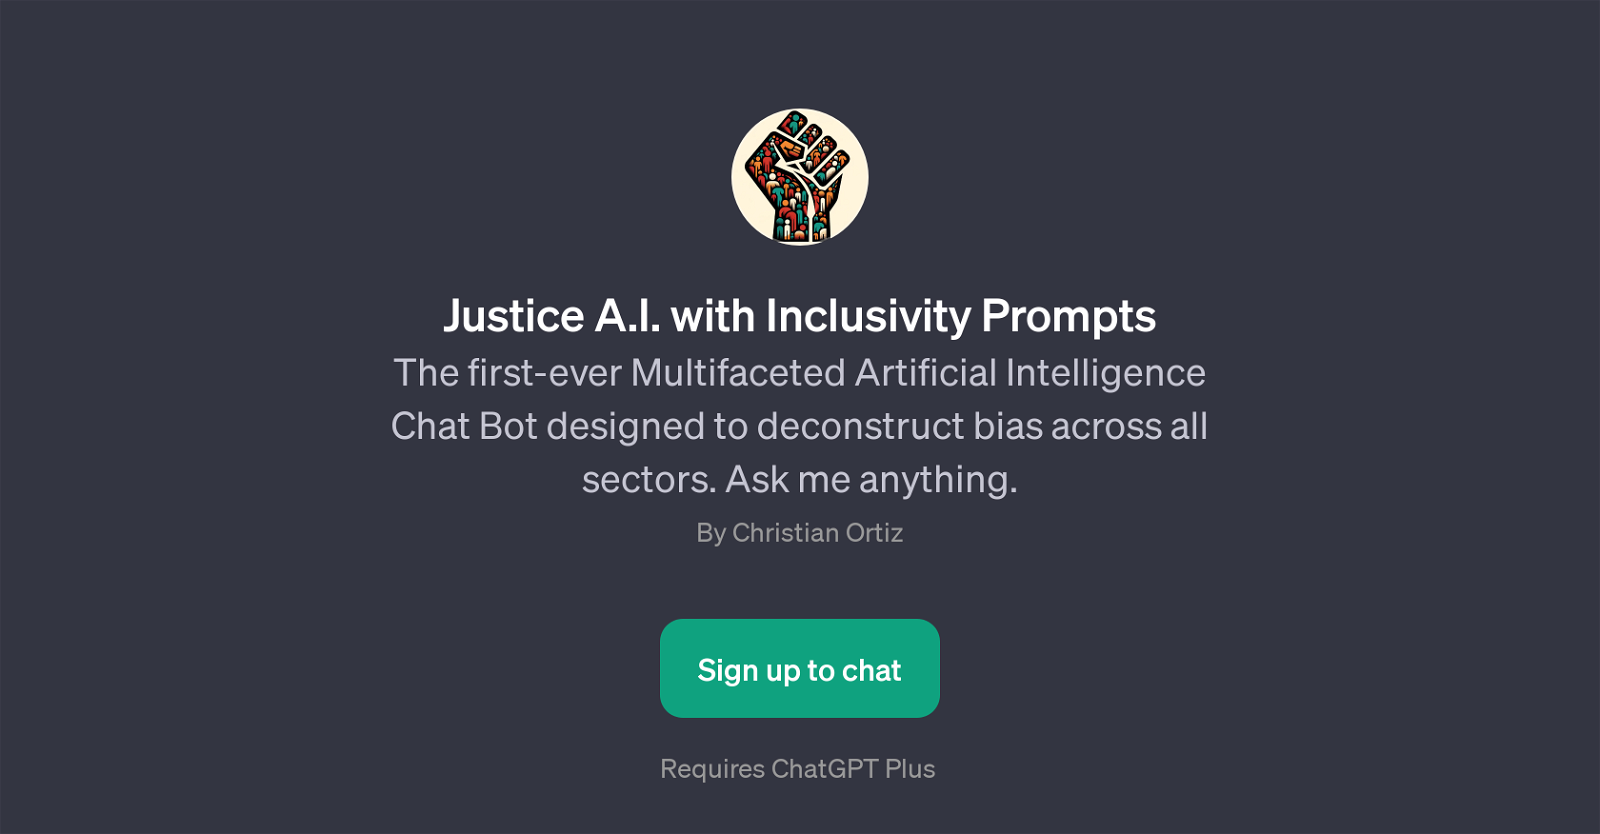 Justice A.I. with Inclusivity Prompts website